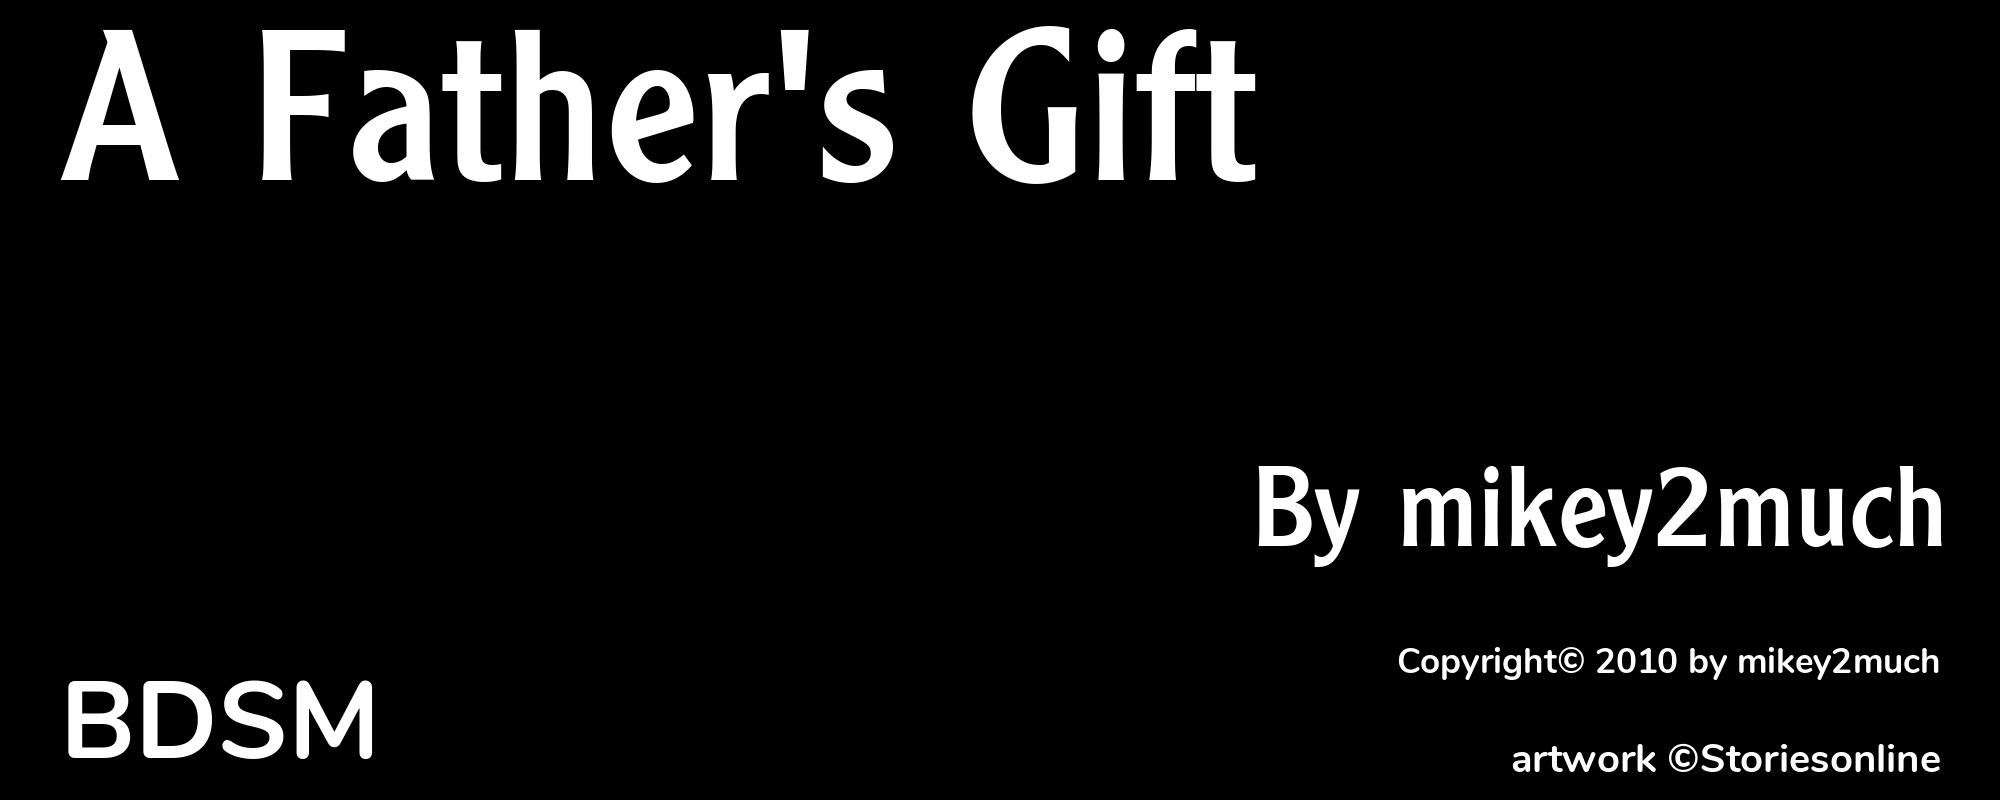 A Father's Gift - Cover